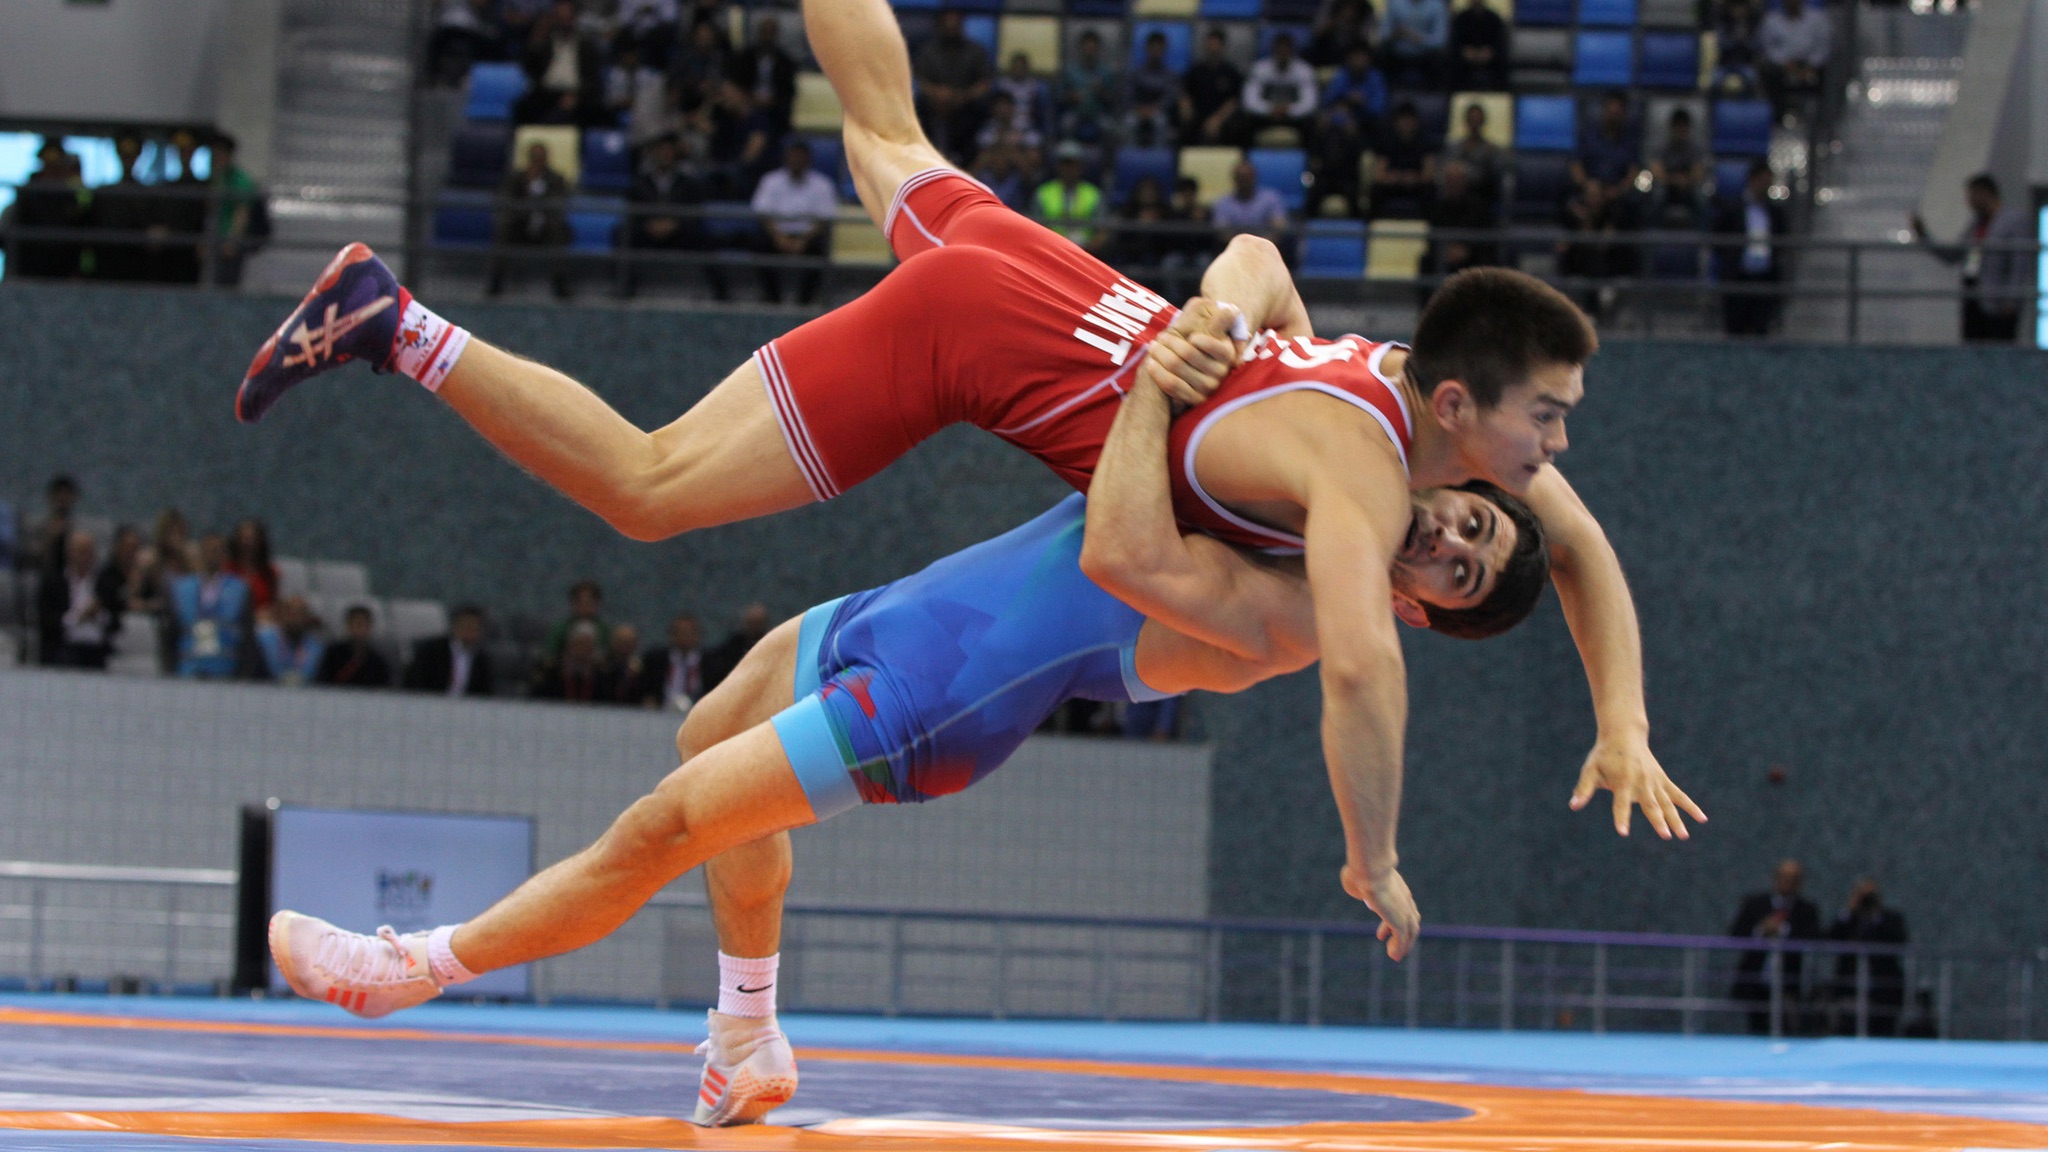 Why Is Wrestling Good For Everyday Self-Defense?